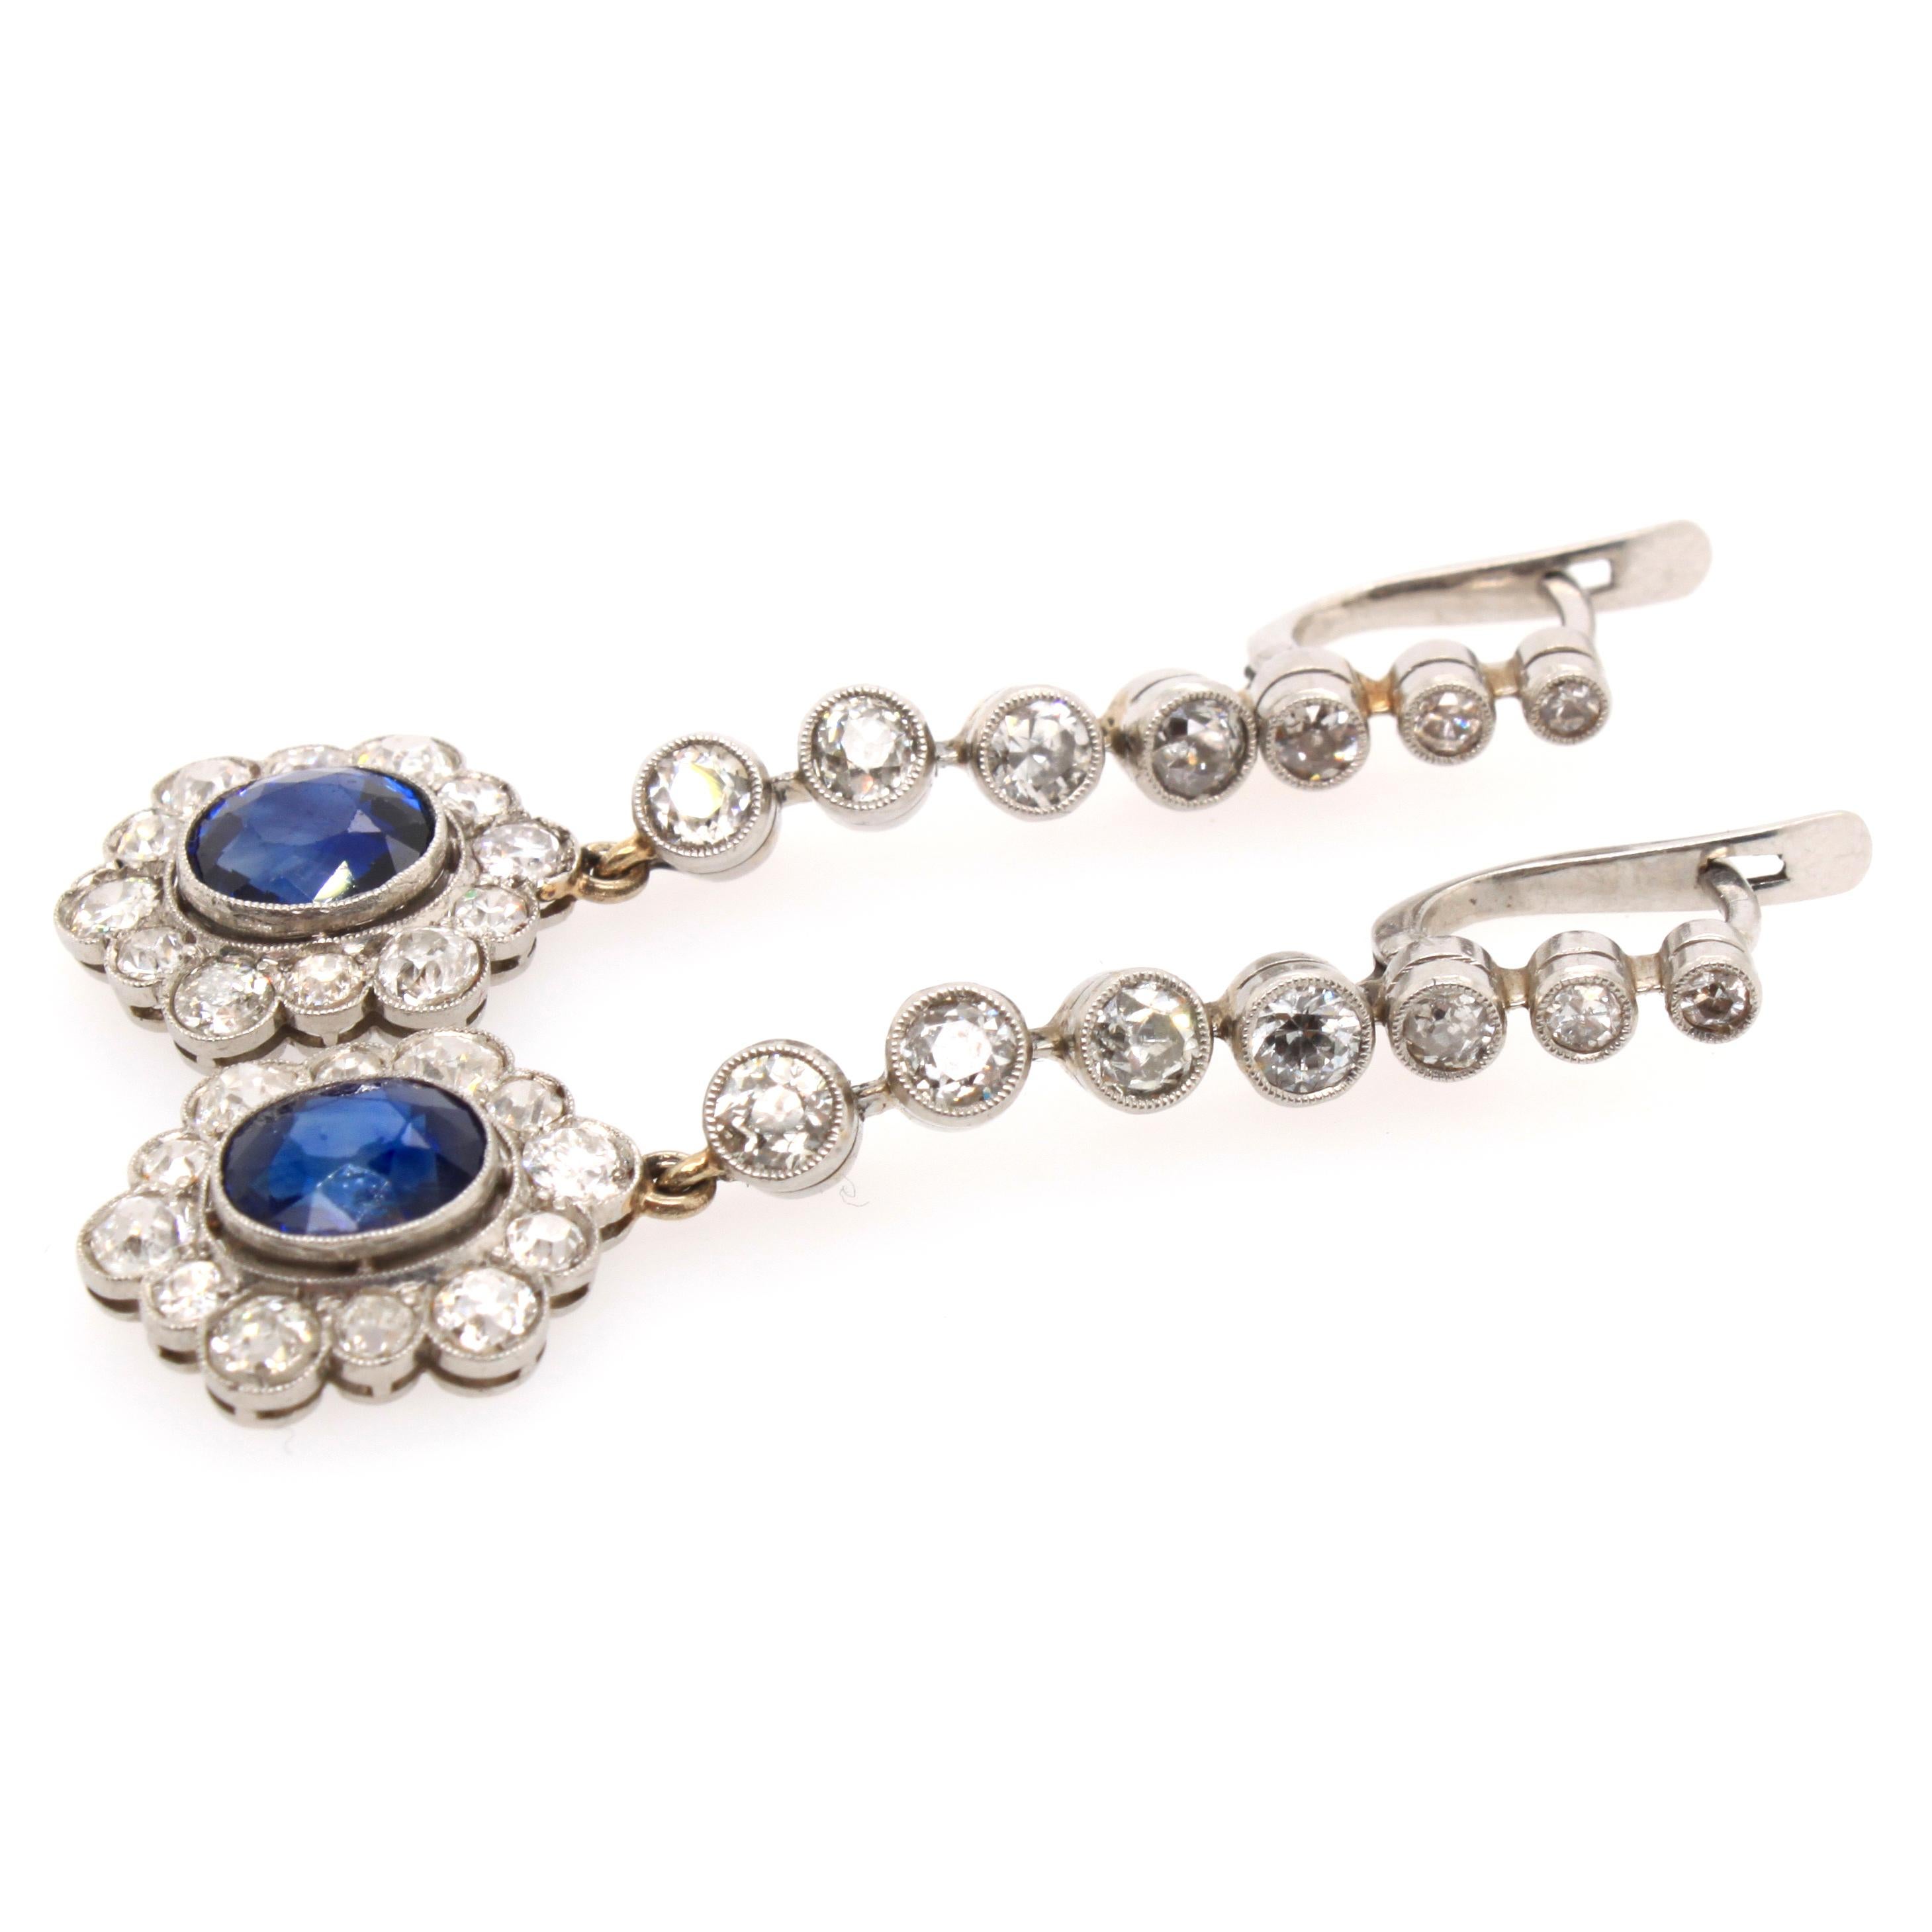 A pair of beautiful Edwardian earrings with sapphire and diamonds, ca. 1910s. The sapphires weigh approximately 3.6 carats and have a strong blue colour. They are surround by an old cut diamond cluster, which oscillates from the top by a line of old